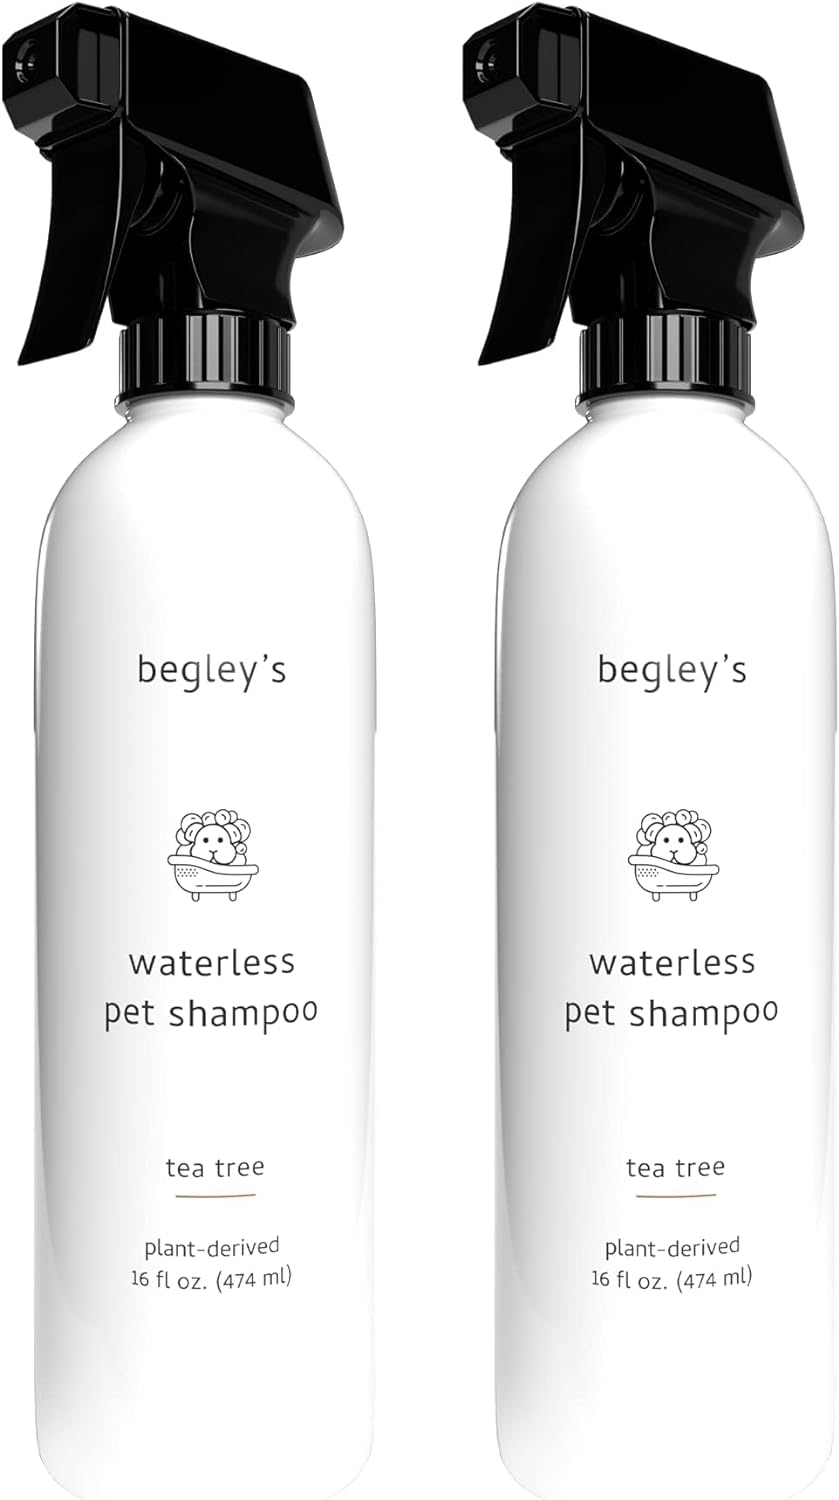 Begley’s Natural No Rinse Waterless Pet Shampoo, Bathless Cleaning, Deodorizing, and Odor Removal for a Shiny, Fresh Smelling Coat - Effective for Dogs, Puppies, and Cats - Fresh Tea Tree Scent